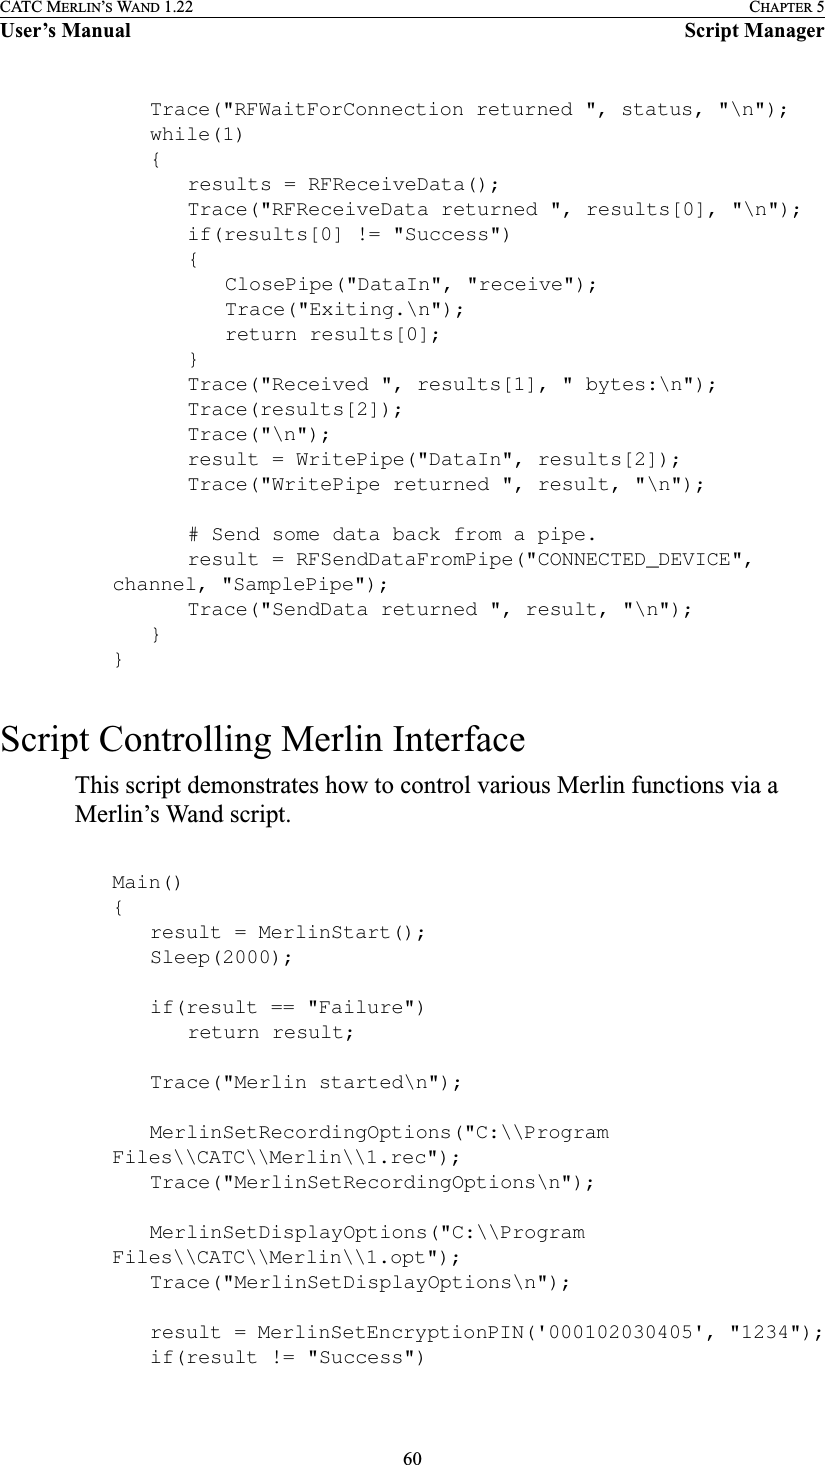 60CATC MERLIN’S WAND 1.22 CHAPTER 5User’s Manual Script ManagerTrace(&quot;RFWaitForConnection returned &quot;, status, &quot;\n&quot;);while(1){results = RFReceiveData();Trace(&quot;RFReceiveData returned &quot;, results[0], &quot;\n&quot;);if(results[0] != &quot;Success&quot;){ClosePipe(&quot;DataIn&quot;, &quot;receive&quot;);Trace(&quot;Exiting.\n&quot;);return results[0];}Trace(&quot;Received &quot;, results[1], &quot; bytes:\n&quot;);Trace(results[2]);Trace(&quot;\n&quot;);result = WritePipe(&quot;DataIn&quot;, results[2]);Trace(&quot;WritePipe returned &quot;, result, &quot;\n&quot;);# Send some data back from a pipe.result = RFSendDataFromPipe(&quot;CONNECTED_DEVICE&quot;, channel, &quot;SamplePipe&quot;);Trace(&quot;SendData returned &quot;, result, &quot;\n&quot;);}}Script Controlling Merlin InterfaceThis script demonstrates how to control various Merlin functions via a Merlin’s Wand script.Main(){result = MerlinStart();Sleep(2000);if(result == &quot;Failure&quot;)return result;Trace(&quot;Merlin started\n&quot;);MerlinSetRecordingOptions(&quot;C:\\Program Files\\CATC\\Merlin\\1.rec&quot;);Trace(&quot;MerlinSetRecordingOptions\n&quot;);MerlinSetDisplayOptions(&quot;C:\\Program Files\\CATC\\Merlin\\1.opt&quot;);Trace(&quot;MerlinSetDisplayOptions\n&quot;);result = MerlinSetEncryptionPIN(&apos;000102030405&apos;, &quot;1234&quot;);if(result != &quot;Success&quot;)